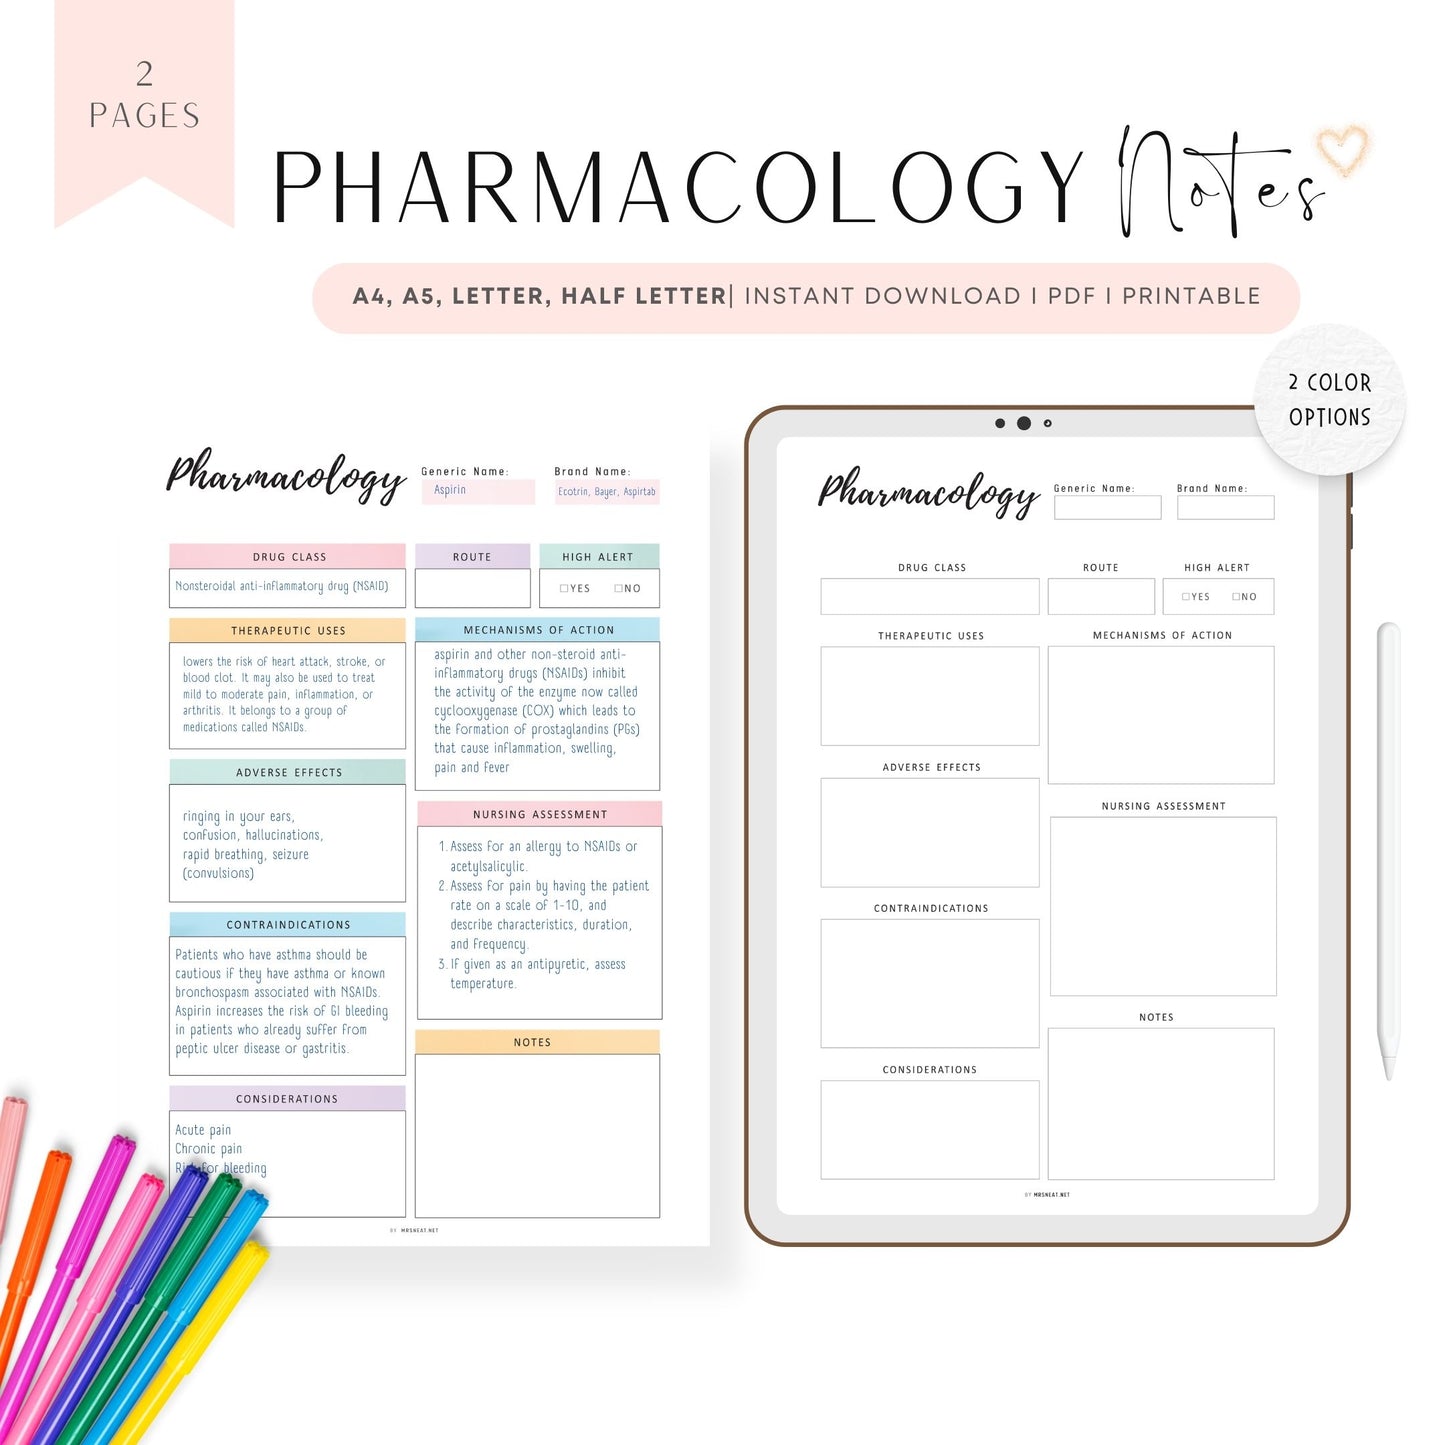 Pharmacology Notes Template Printable, 2 color options, A4, A5, Letter, Half Letter, Digital Planner